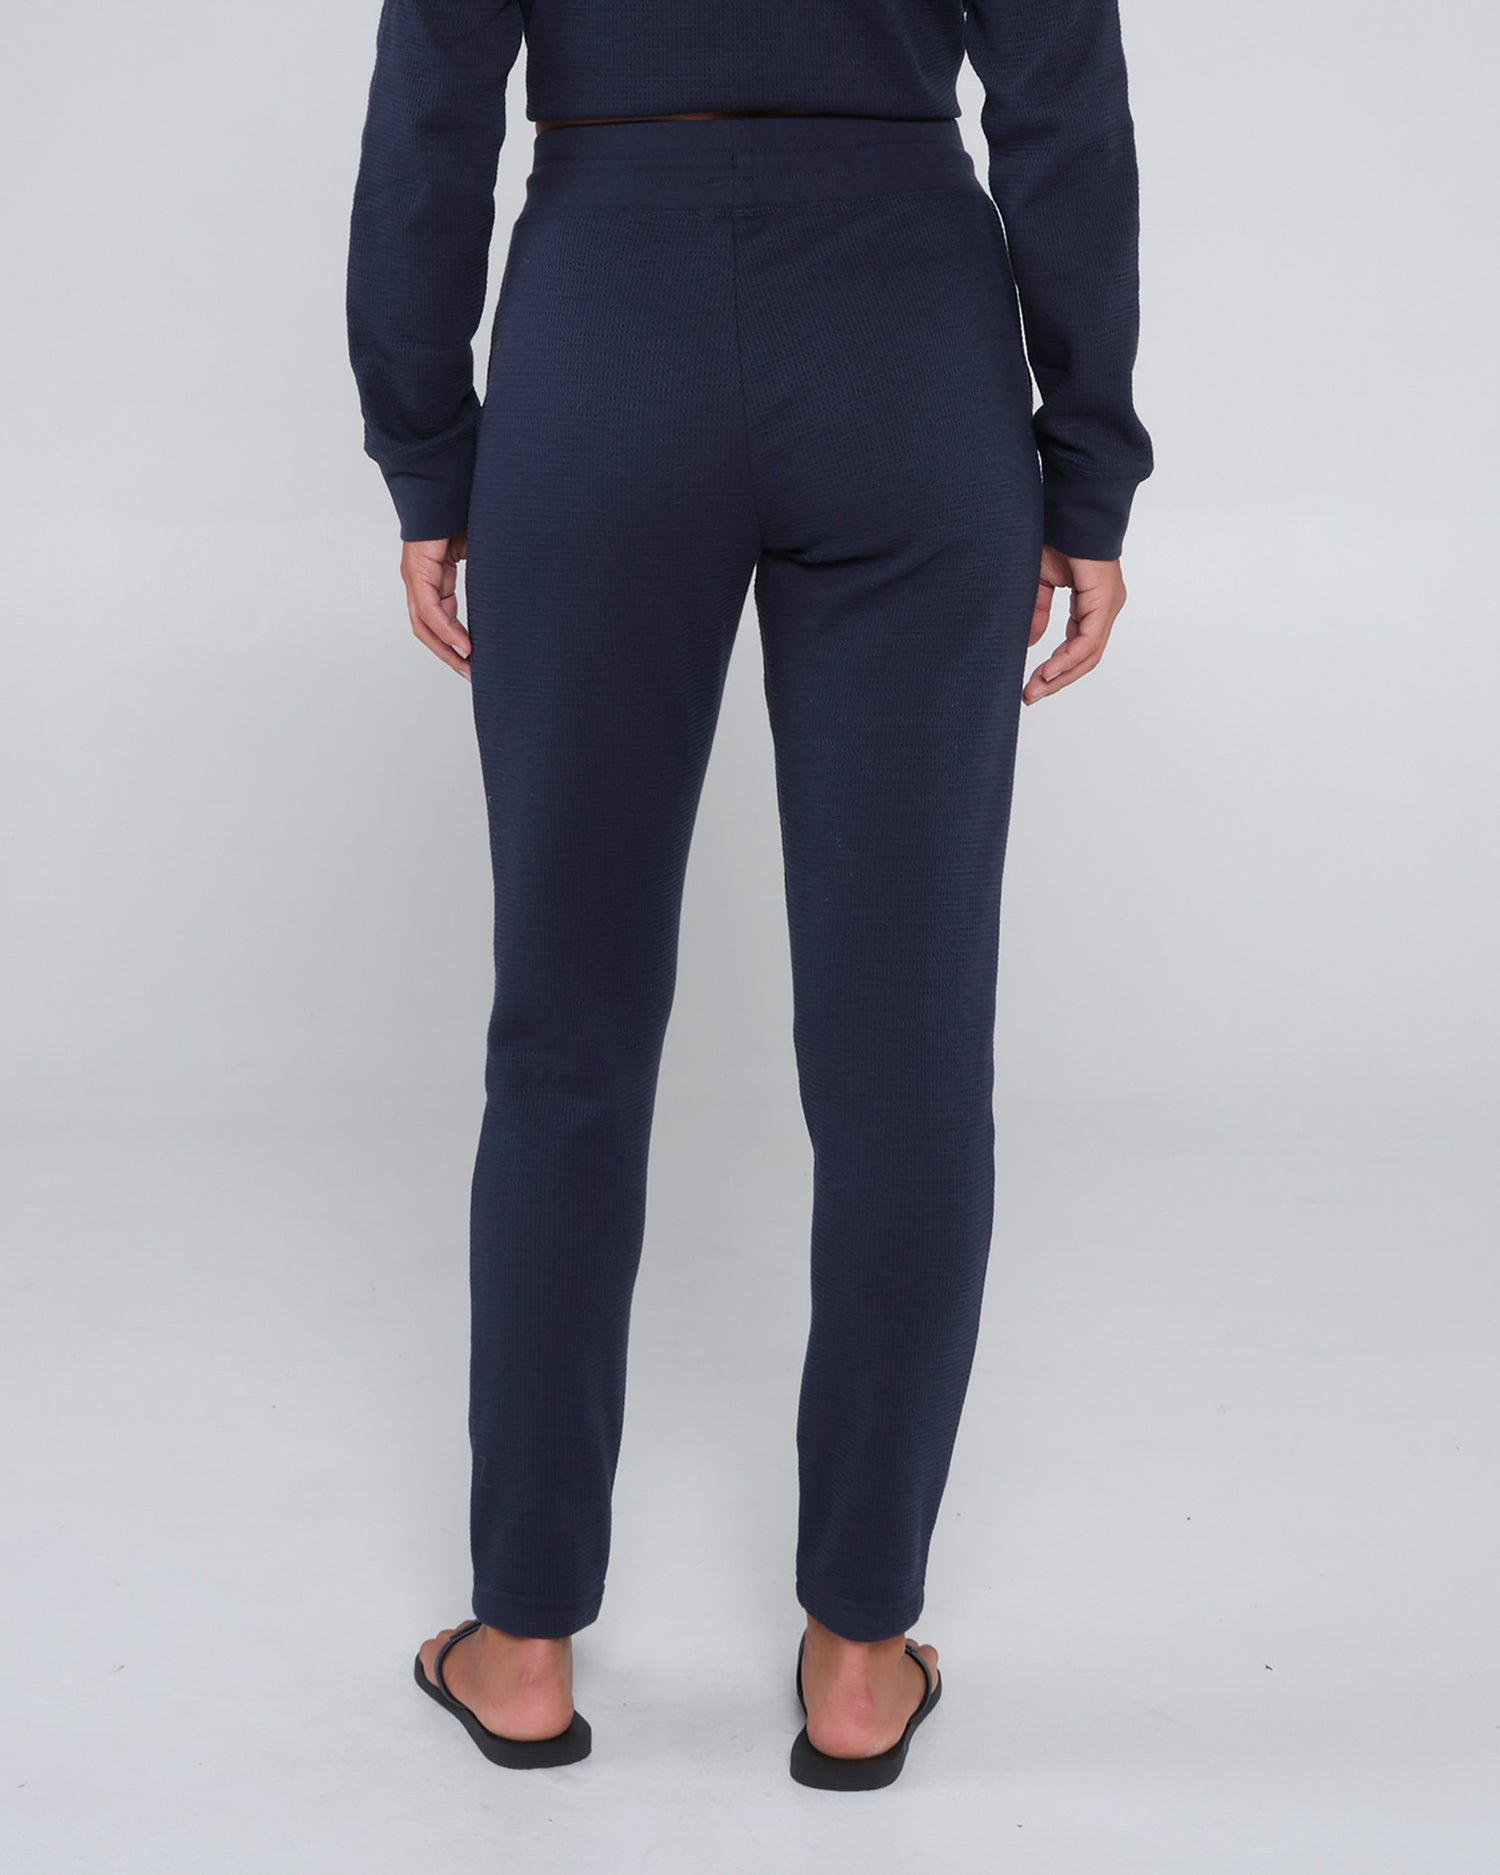 On body back of the Tippet Dark Navy  Pant